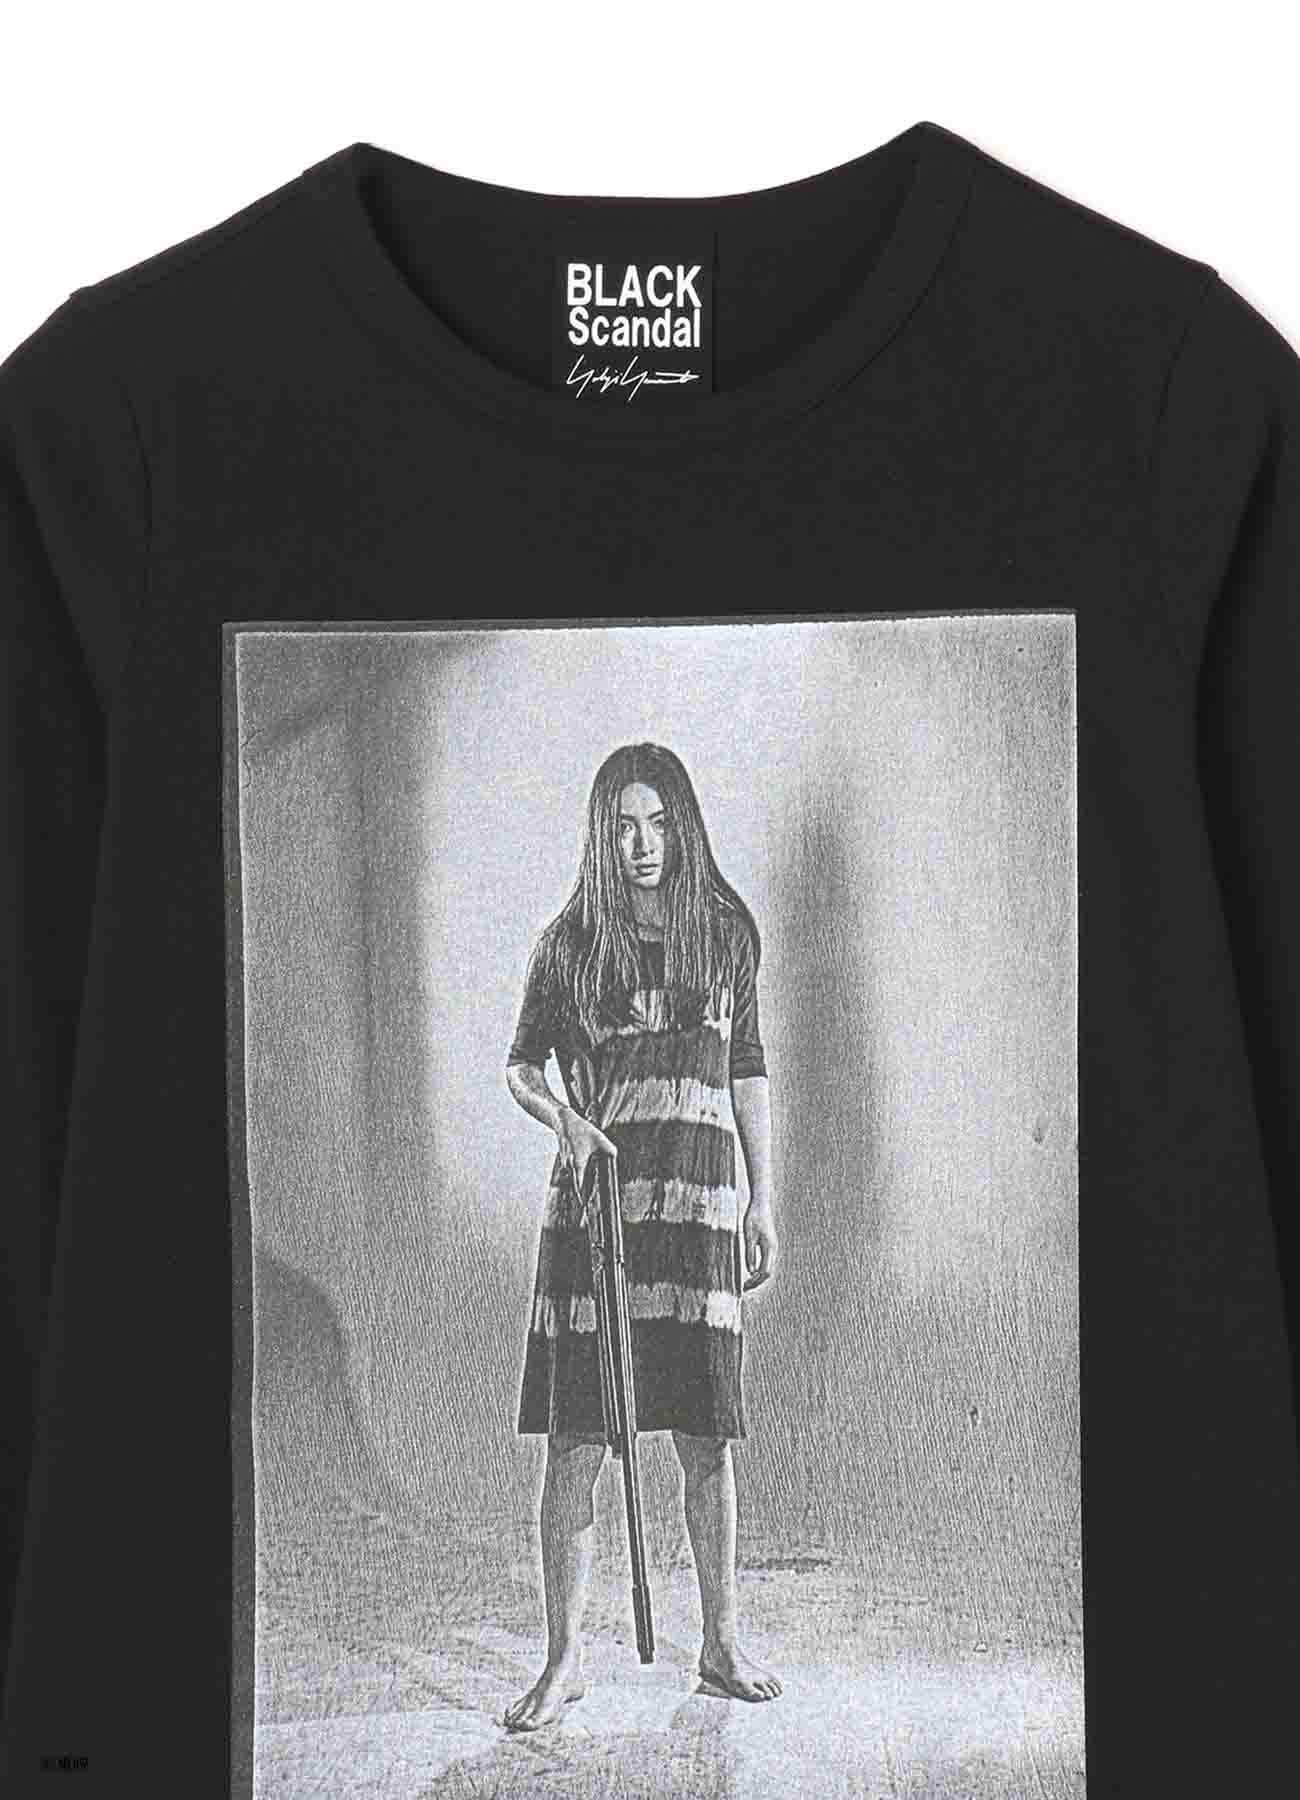 【5/24 10:00(JST) Release】FEMALE CONVICT 701 SCORPION LONG SLEEVES CUT SEWN